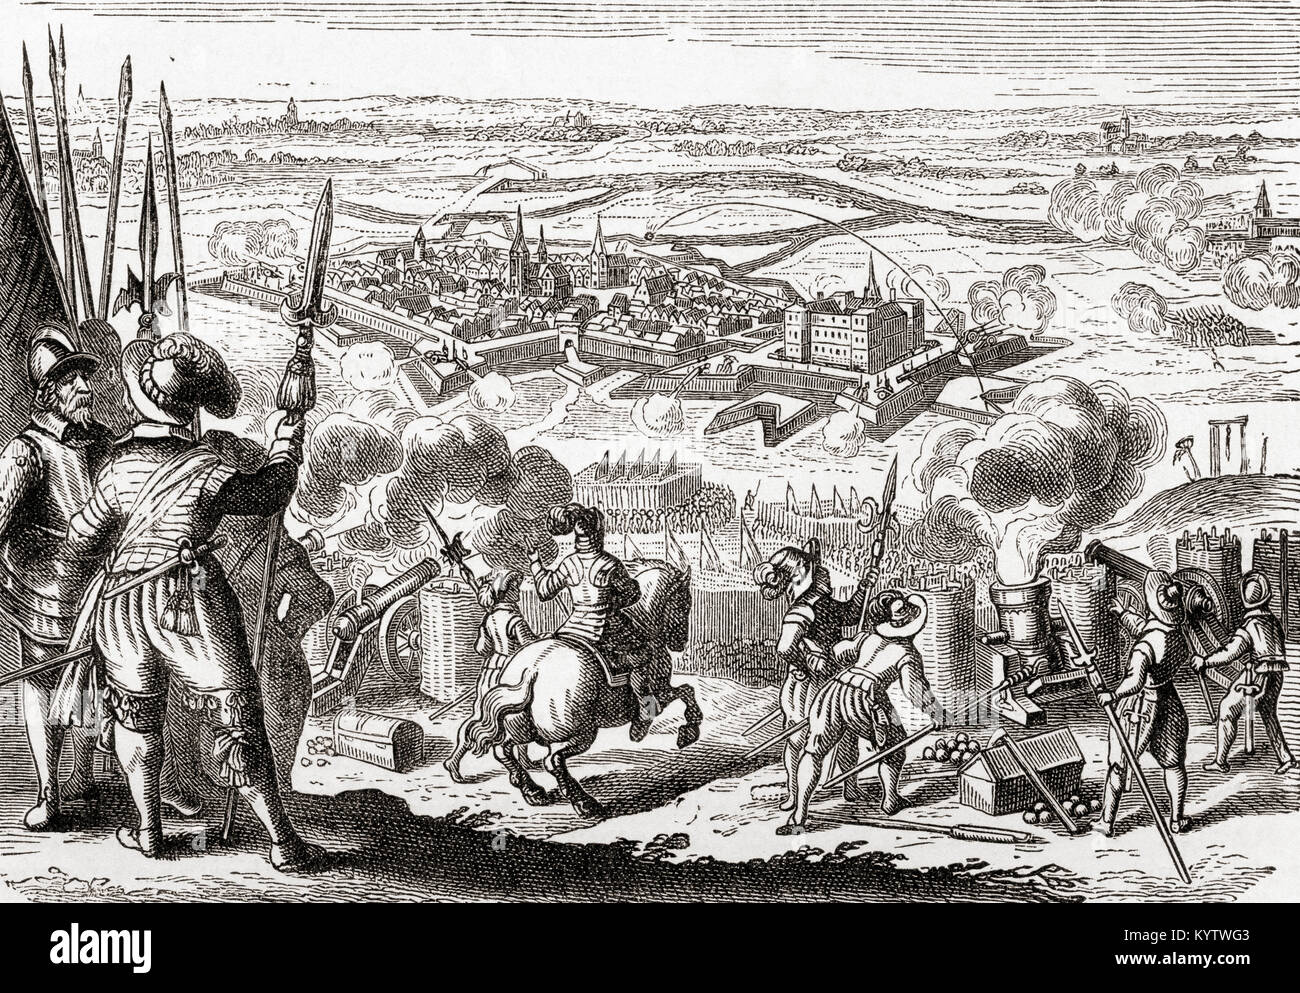 The Siege of Jülich of 1610.  From Ward and Lock's Illustrated History of the World, published c.1882. Stock Photo